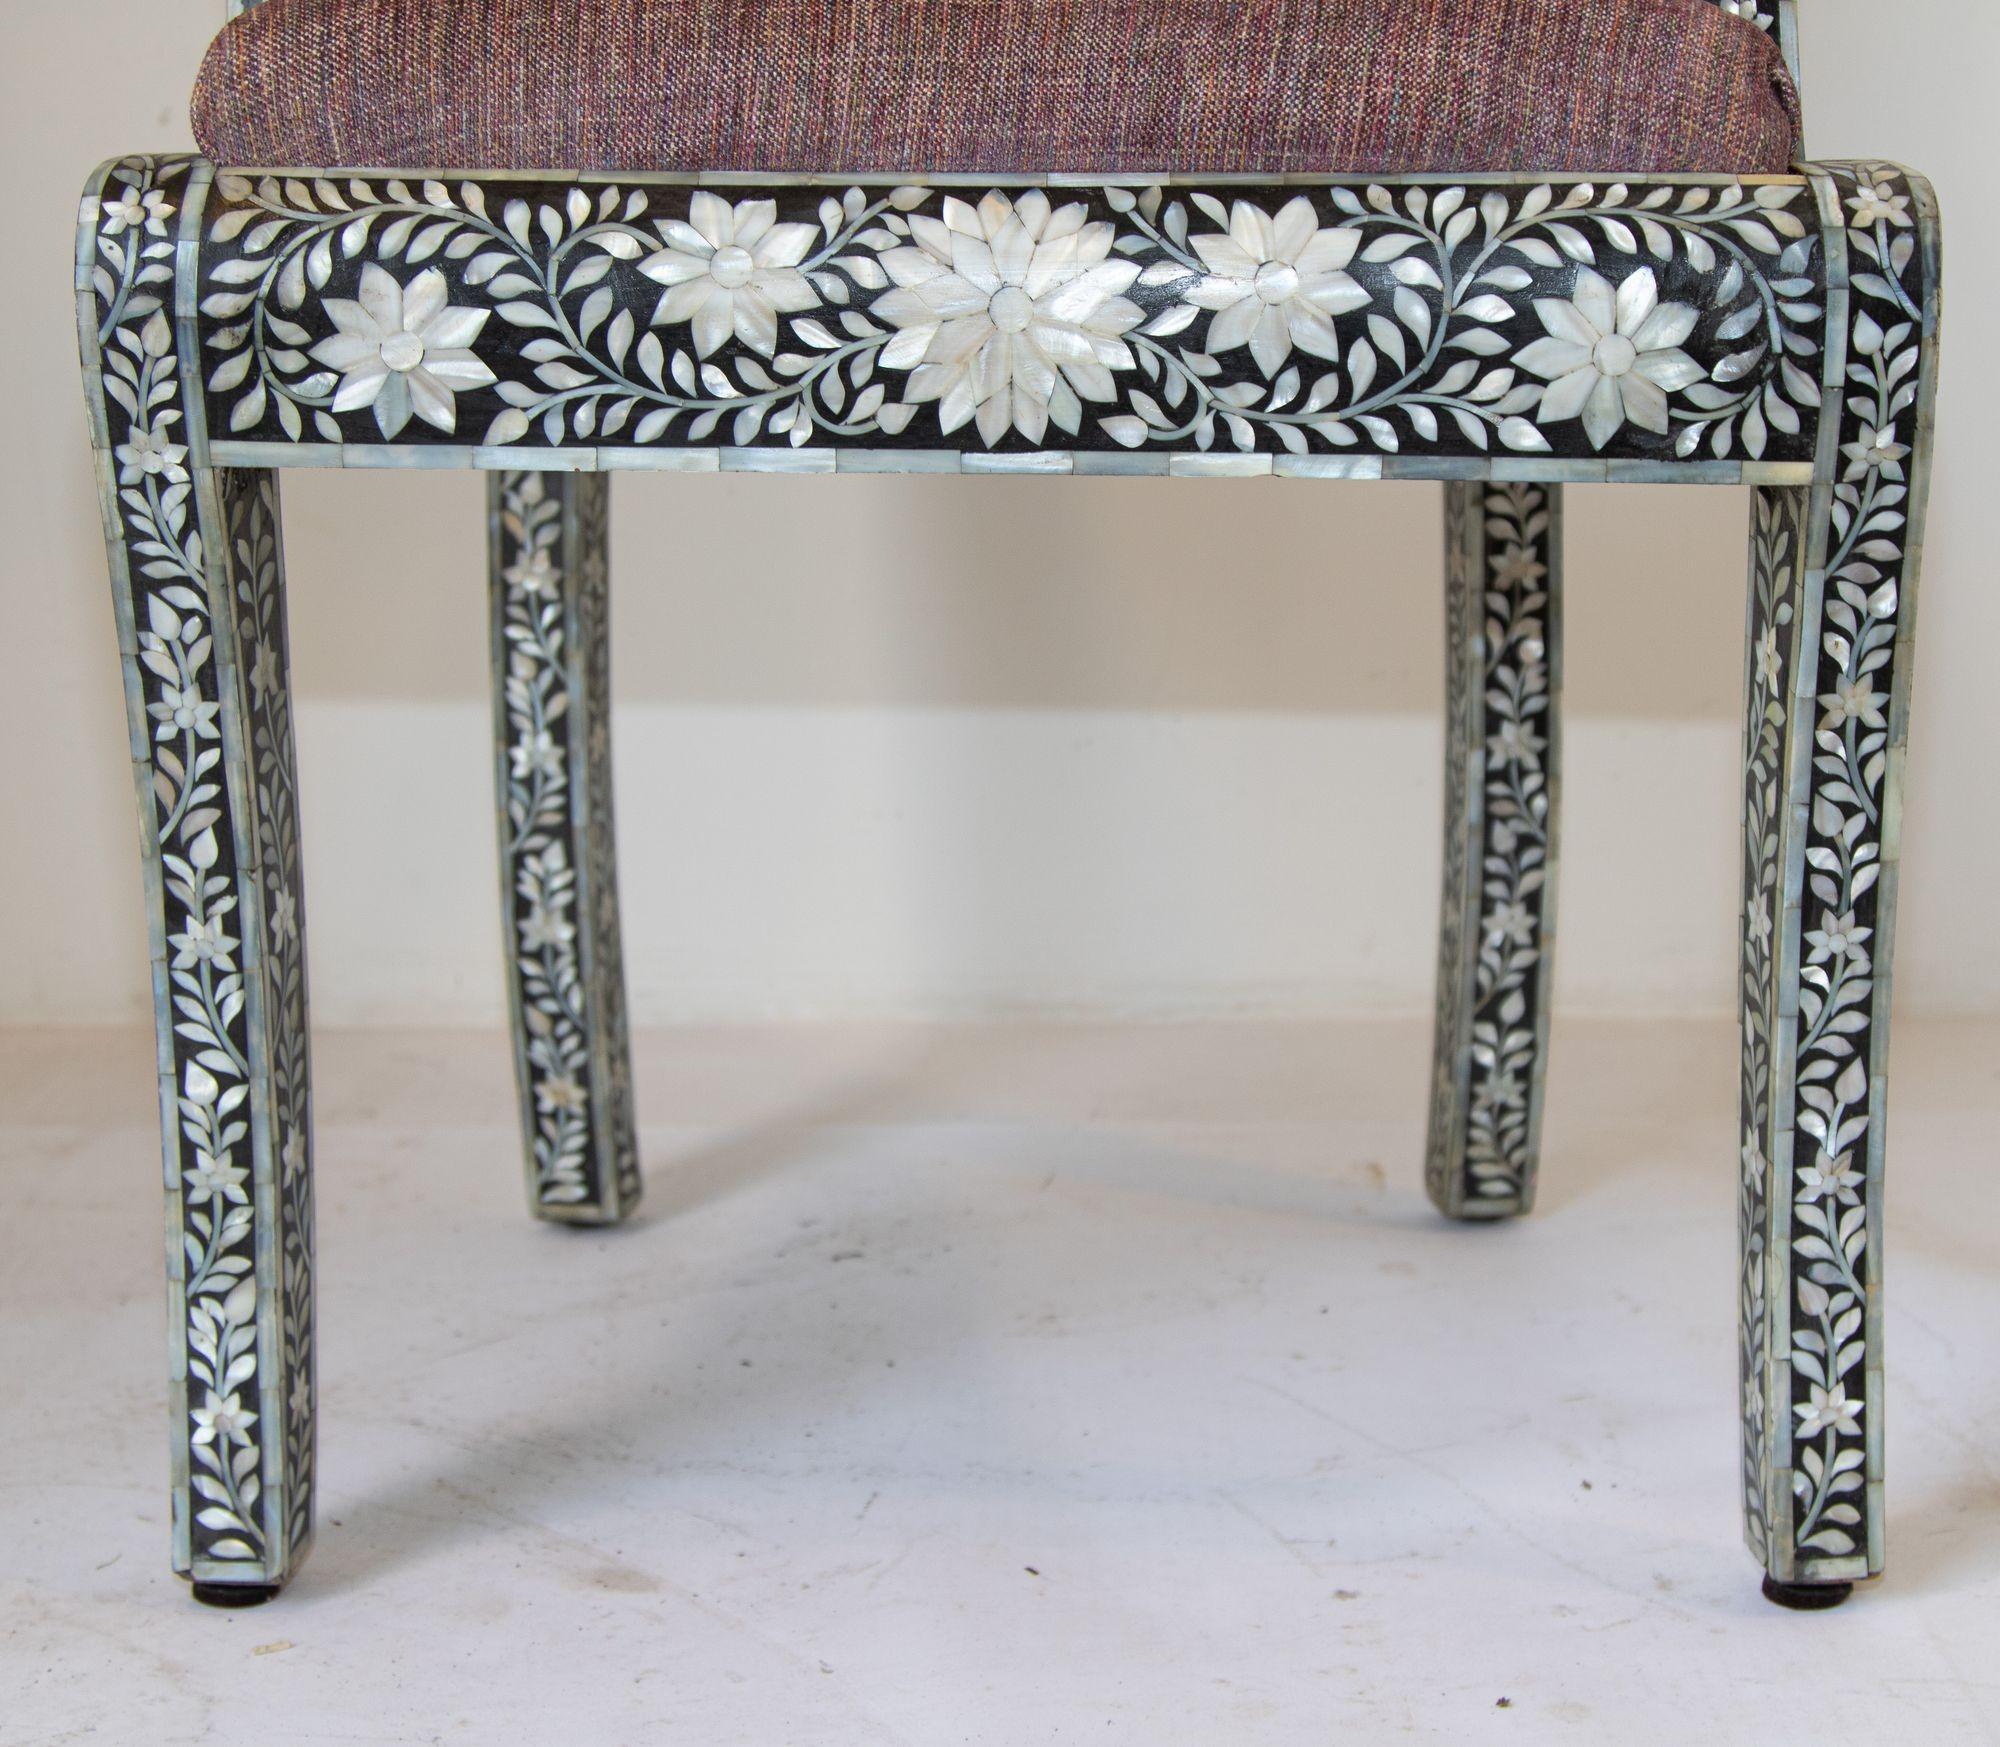 Anglo-Indian Mughal Mother of Pearl Inlaid Klismos Armchair with Ram Head 1 of 2 For Sale 5